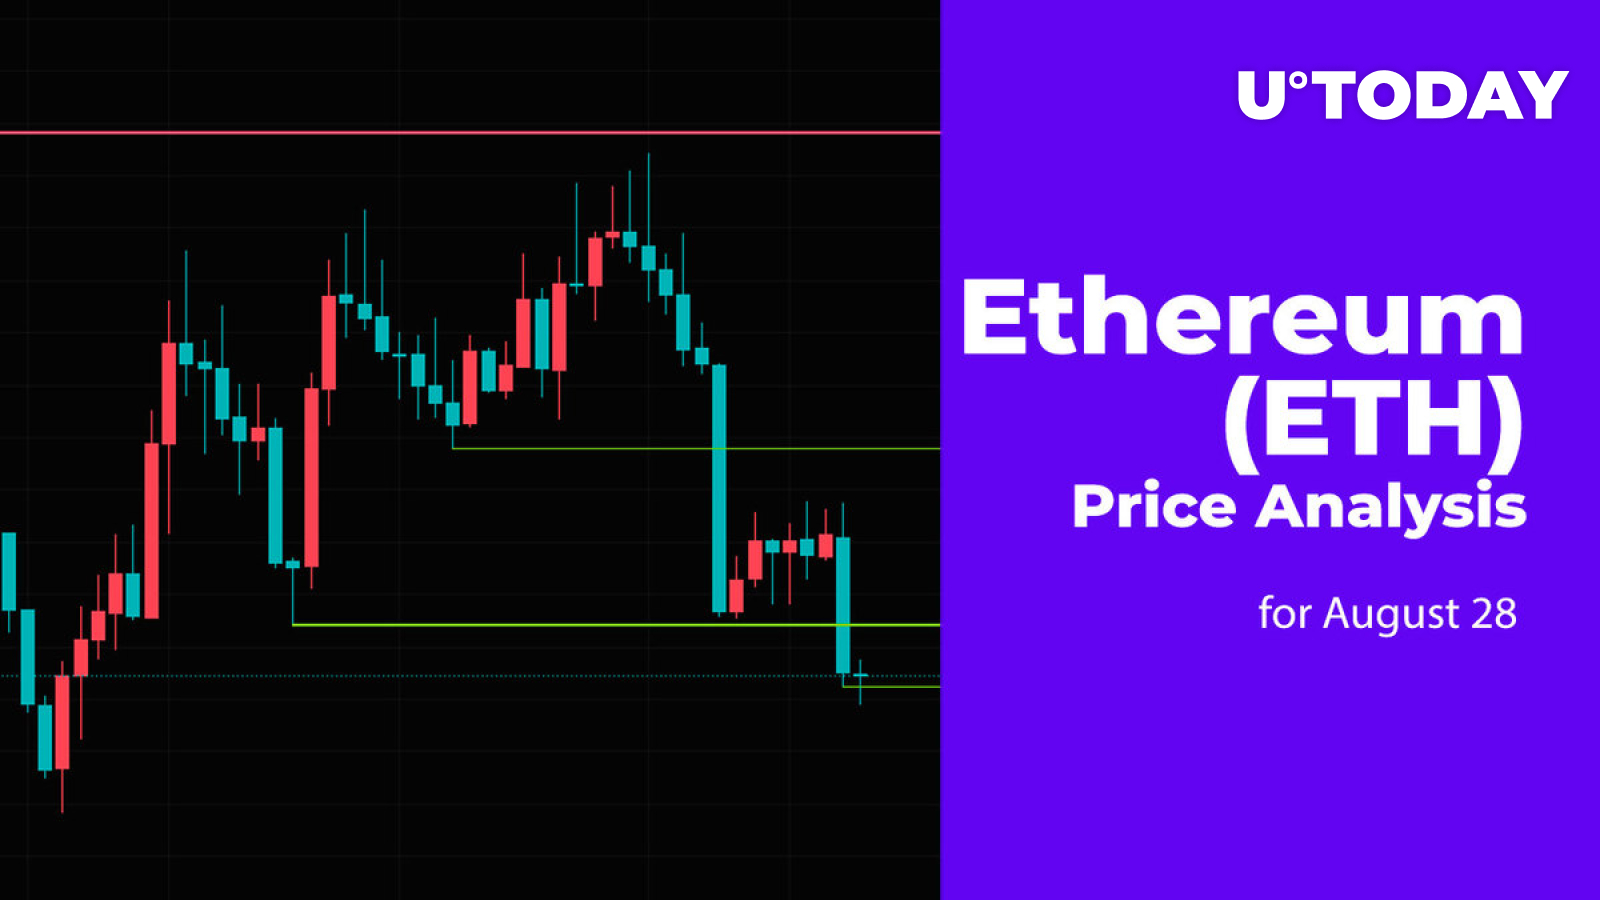 Ethereum (ETH) Price Analysis for August 28